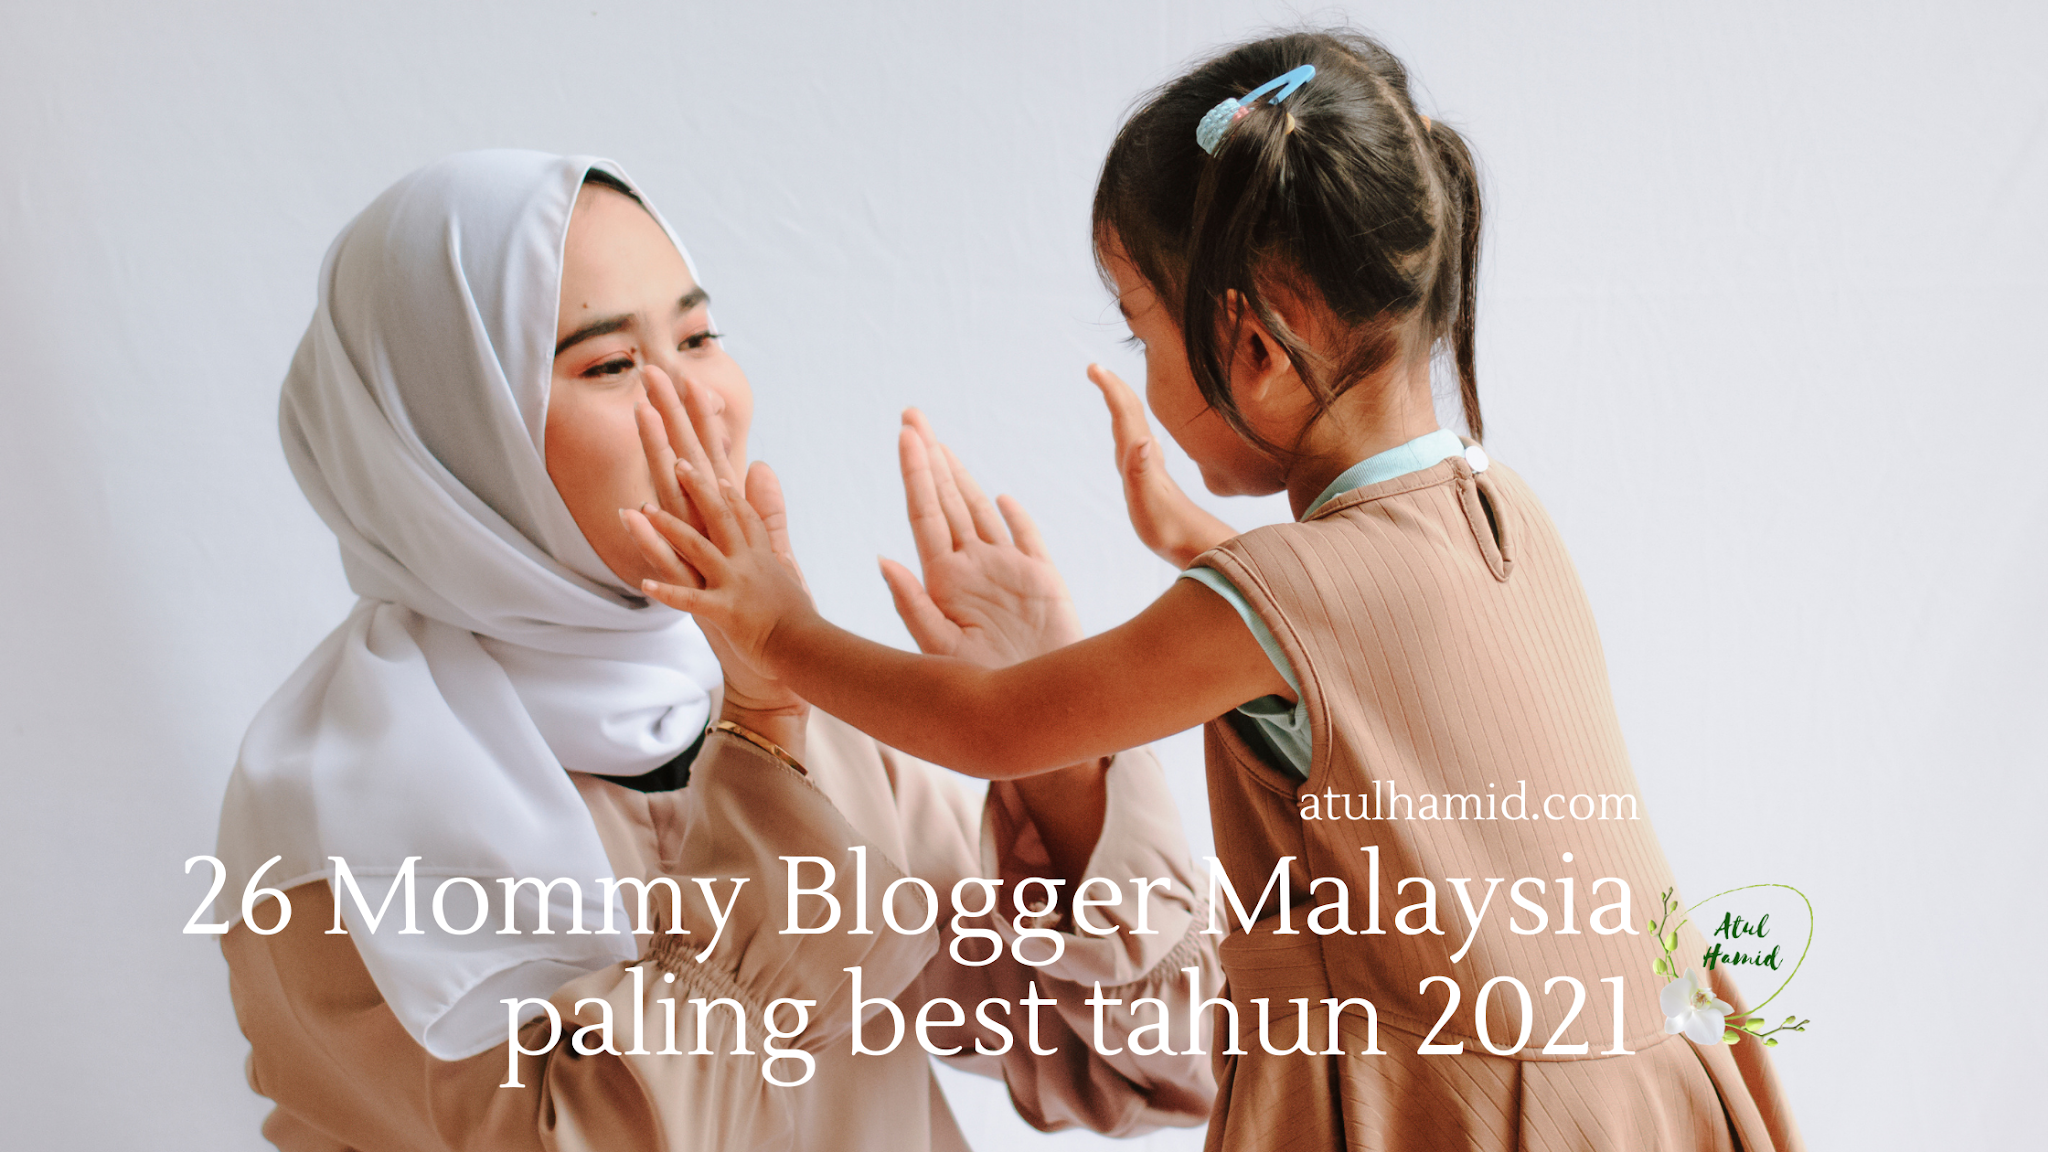 26 Mommy Blogger Malaysia paling best tahun 2021